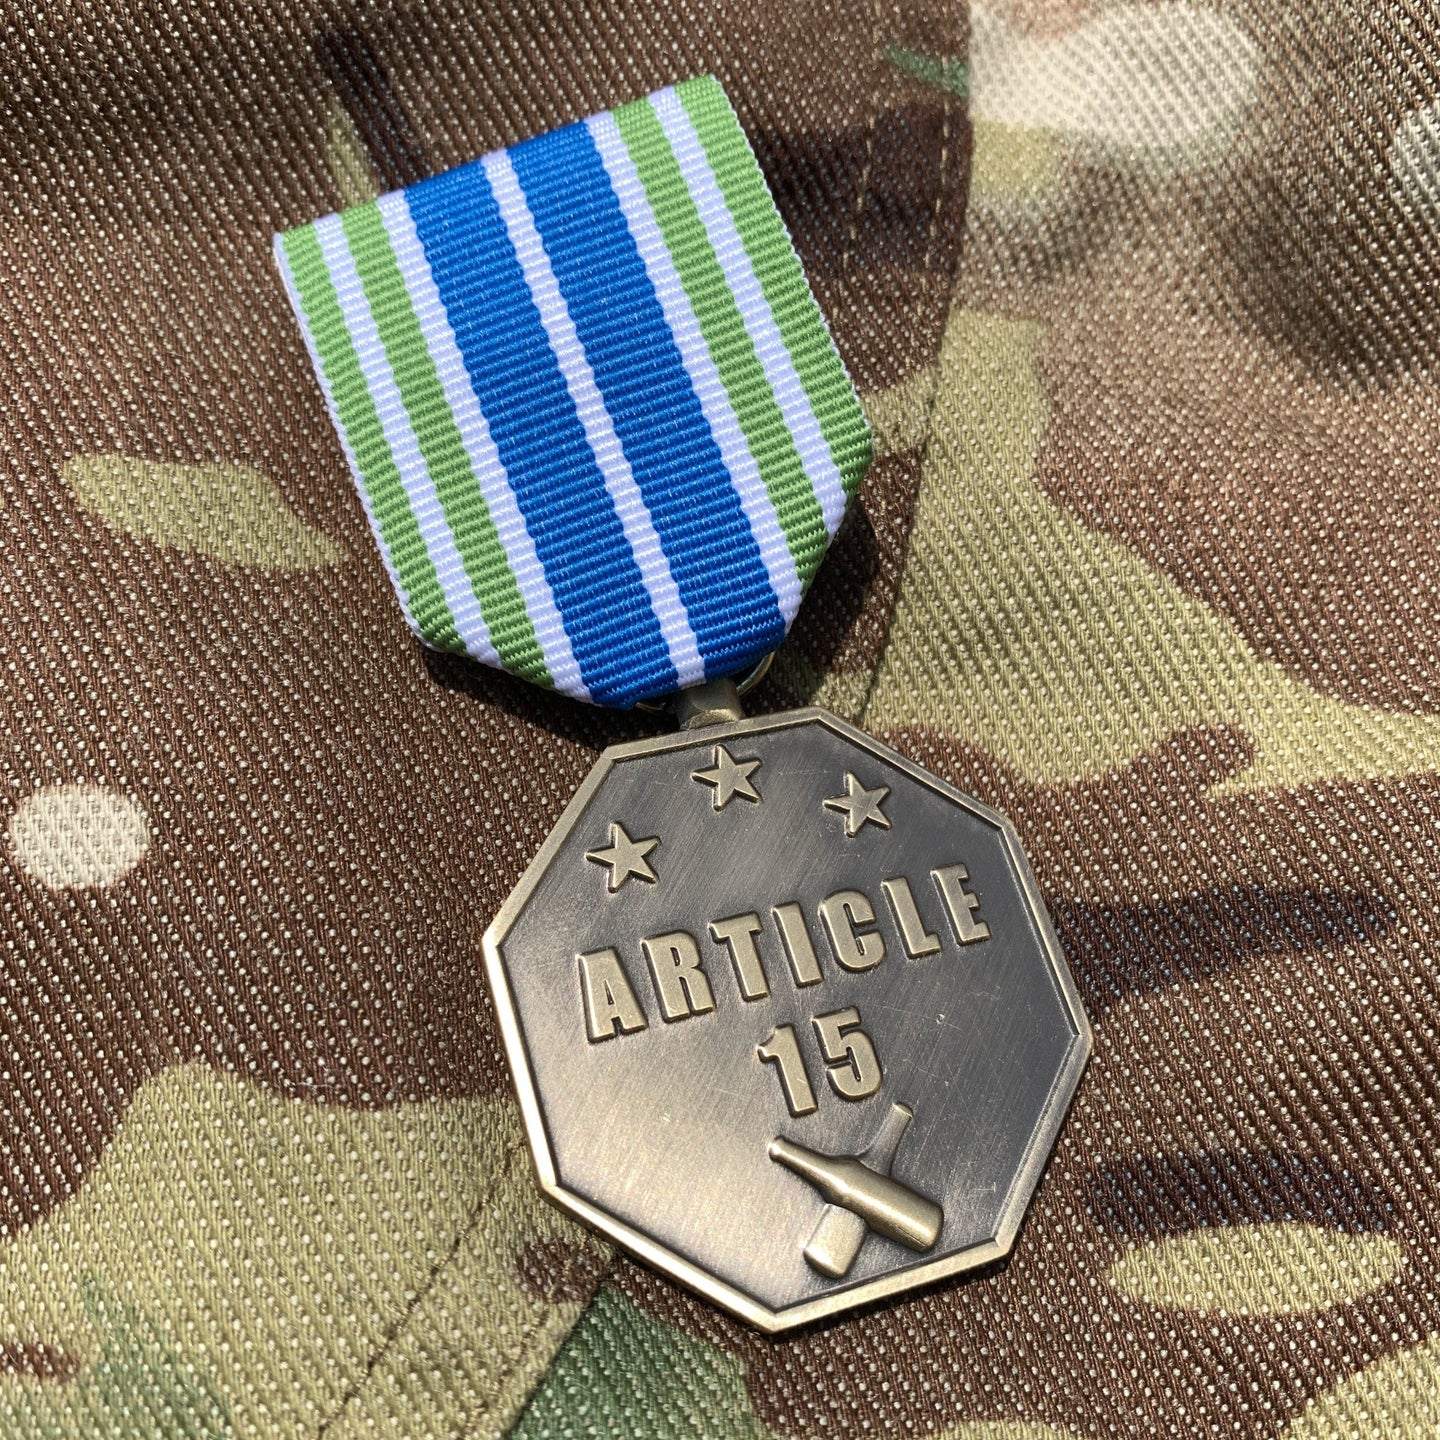 ARTICLE 15 MEDAL